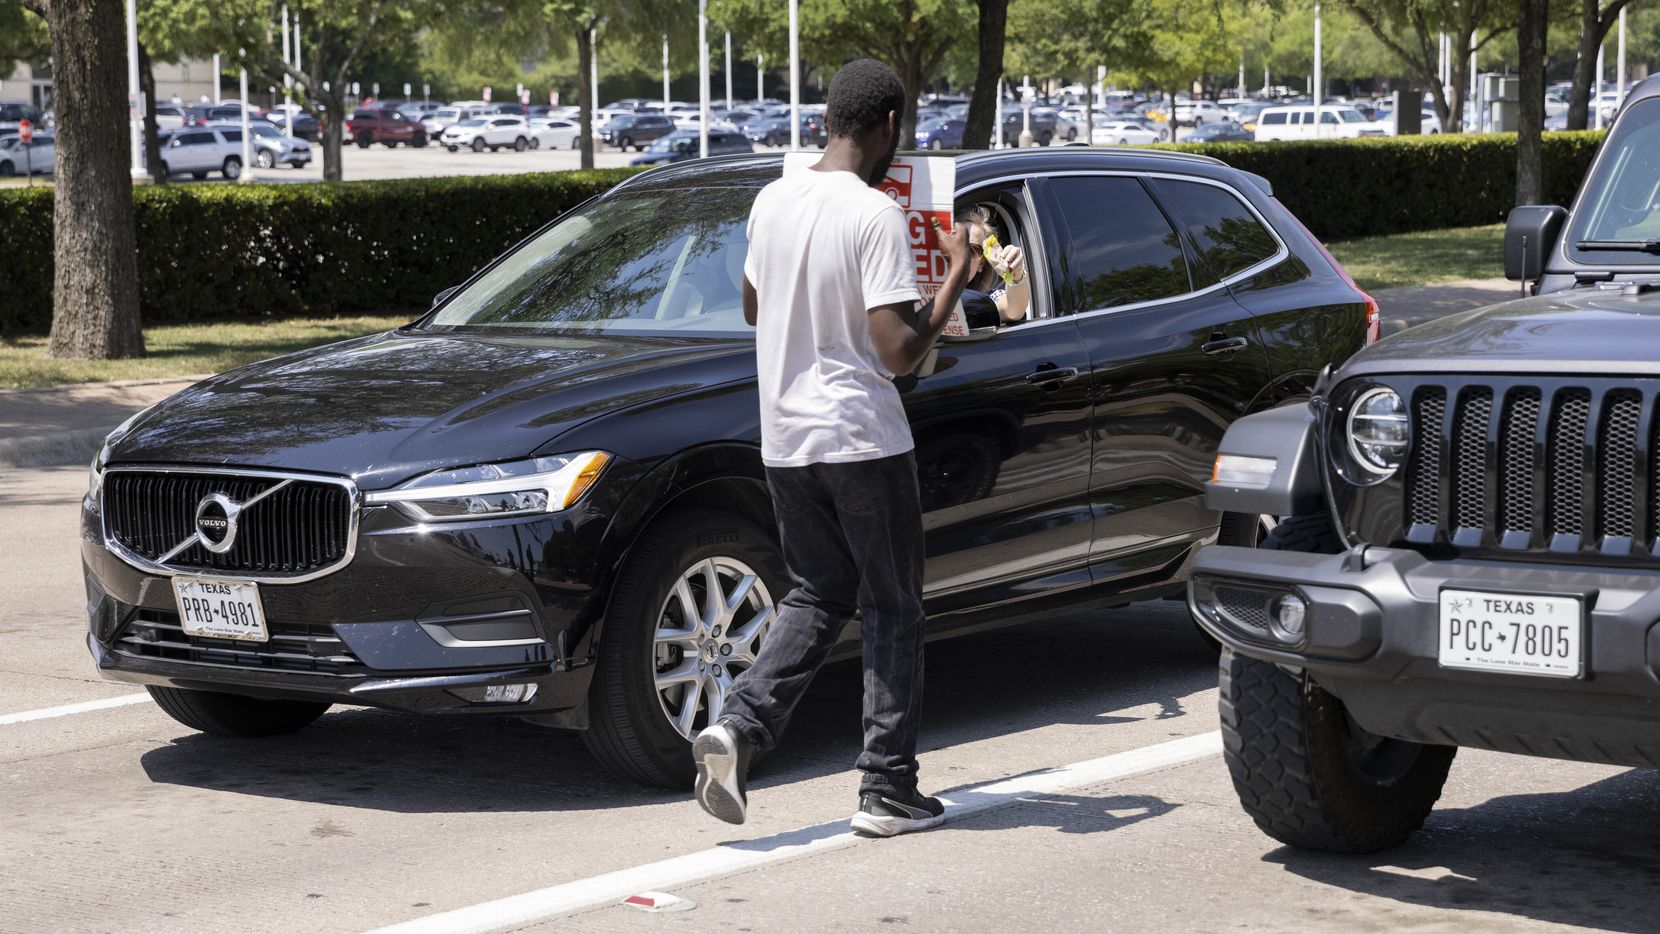 In Dallas, panhandling from the median might soon get you a $500 ticket